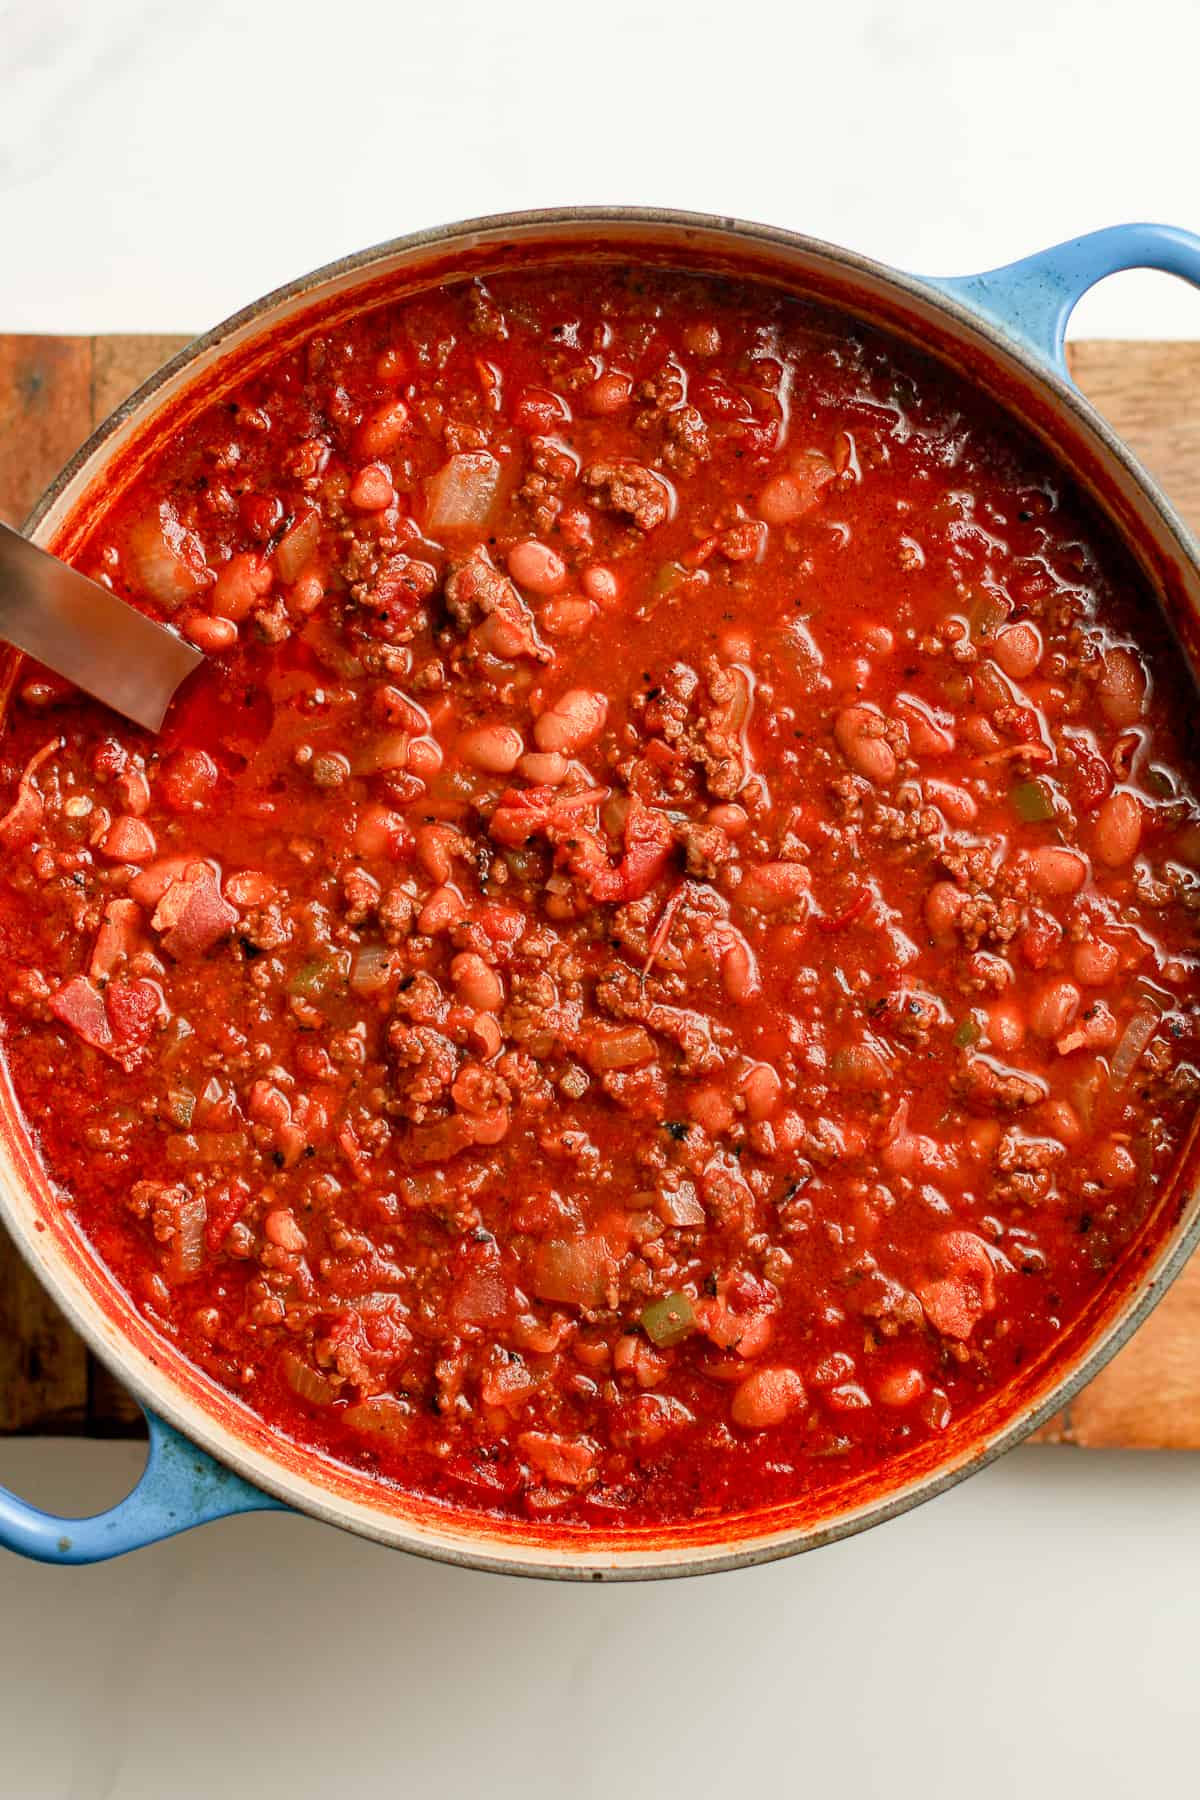 Overhead shot of a stock pot of chili with a soup ladle.